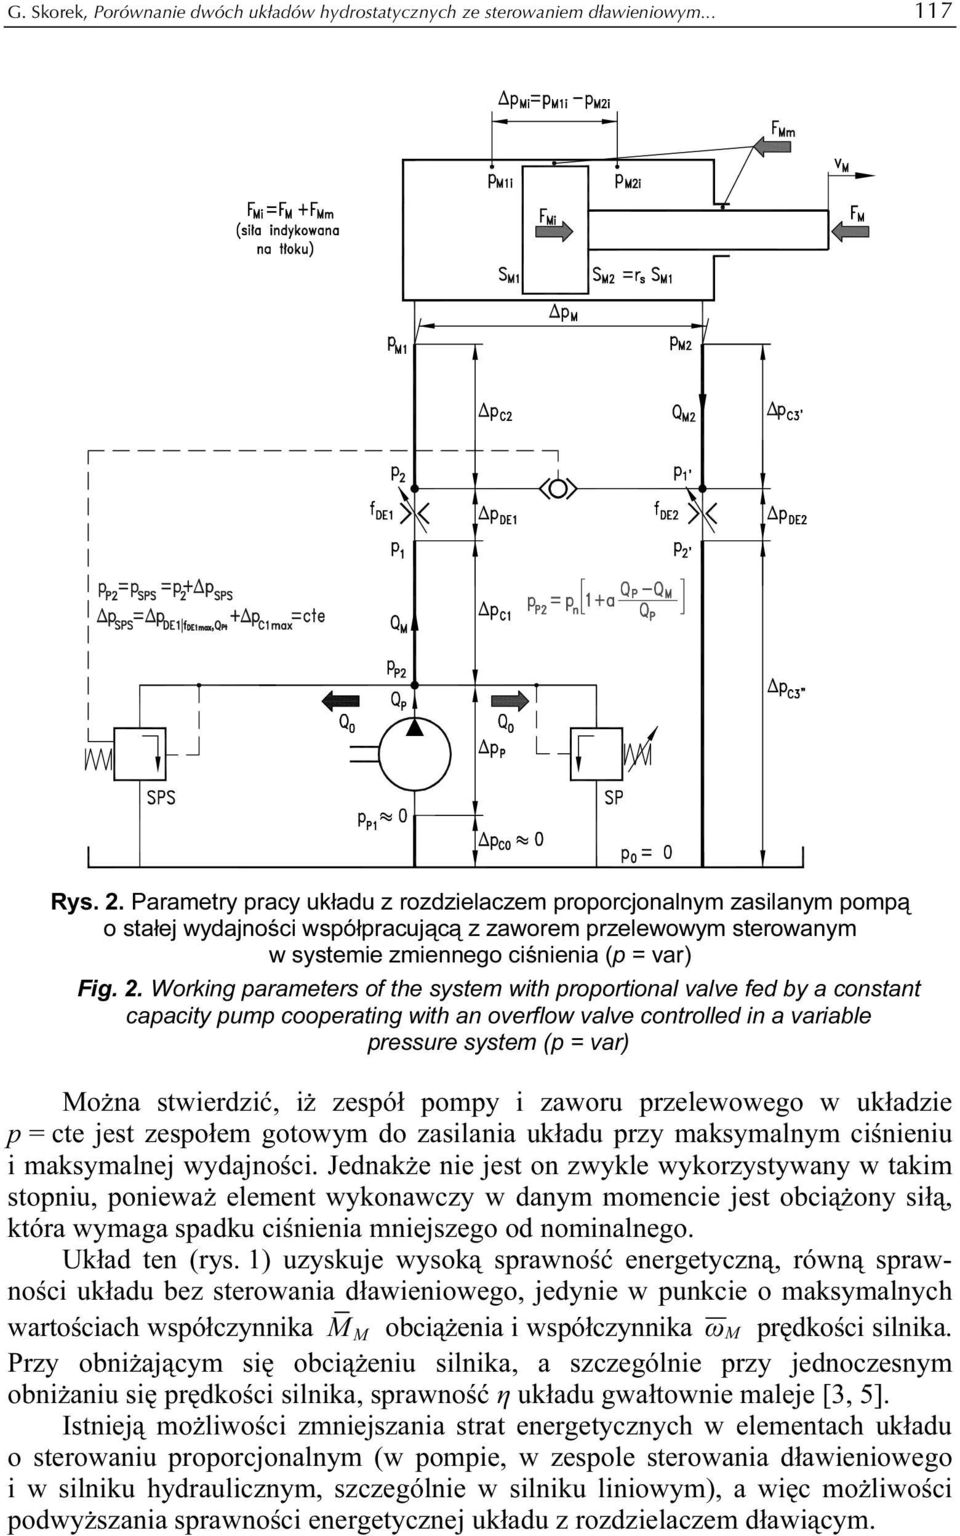 Working parameters of the system with proportional valve fed by a constant capacity pump cooperating with an overflow valve controlled in a variable pressure system (p = var) Można stwierdzić, iż